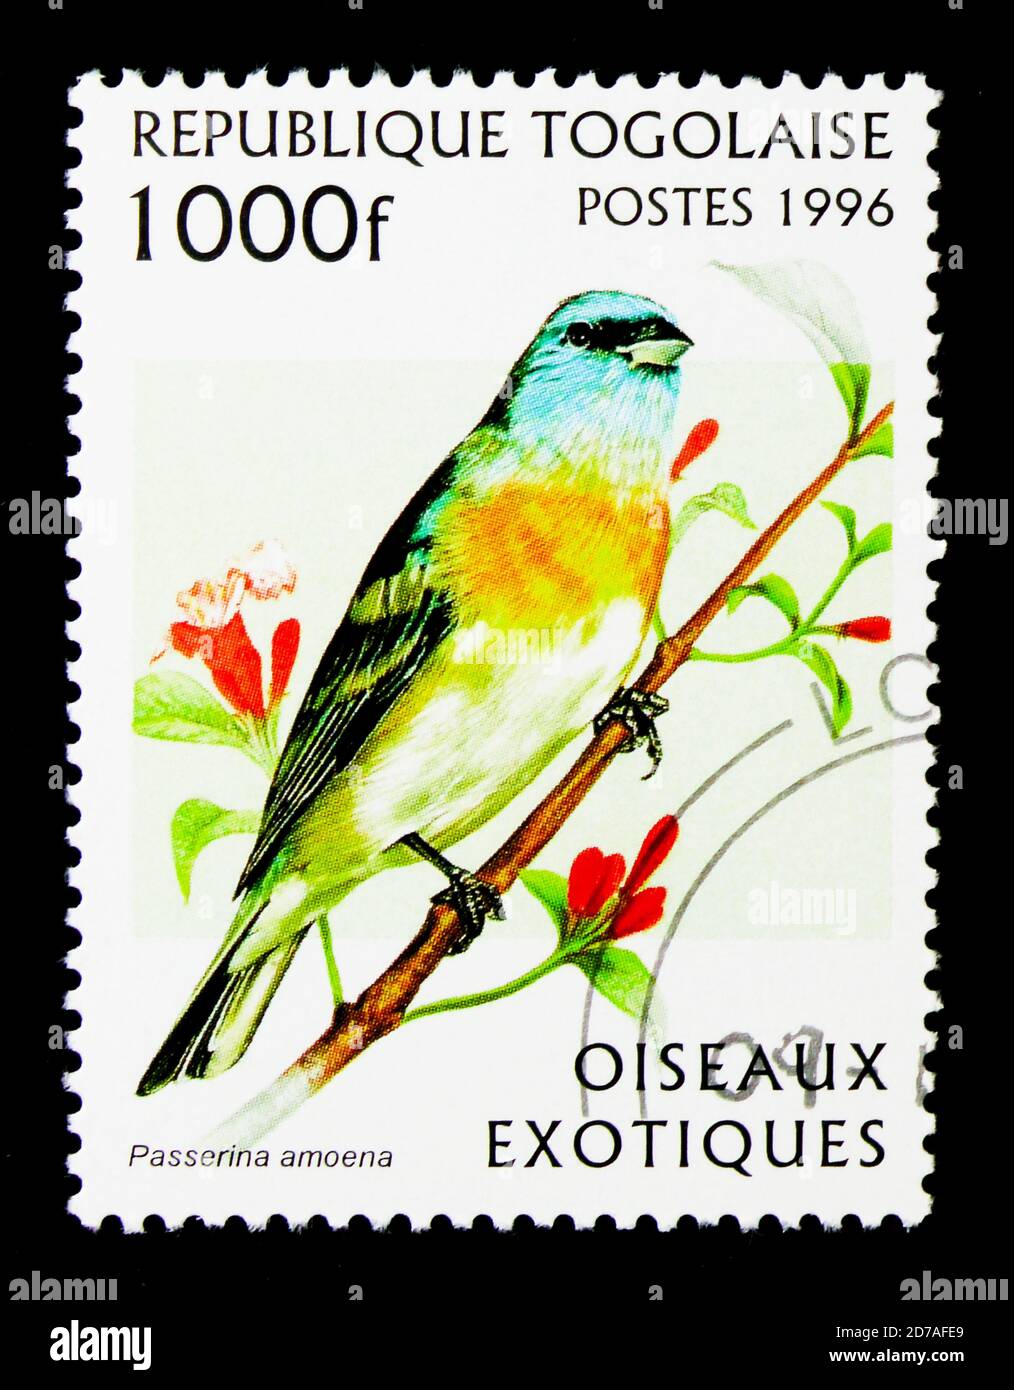 MOSCOW, RUSSIA - NOVEMBER 26, 2017: A stamp printed in Togo shows Lazuli Bunting (Passerina amoena), Exotic birds serie, circa 1996 Stock Photo